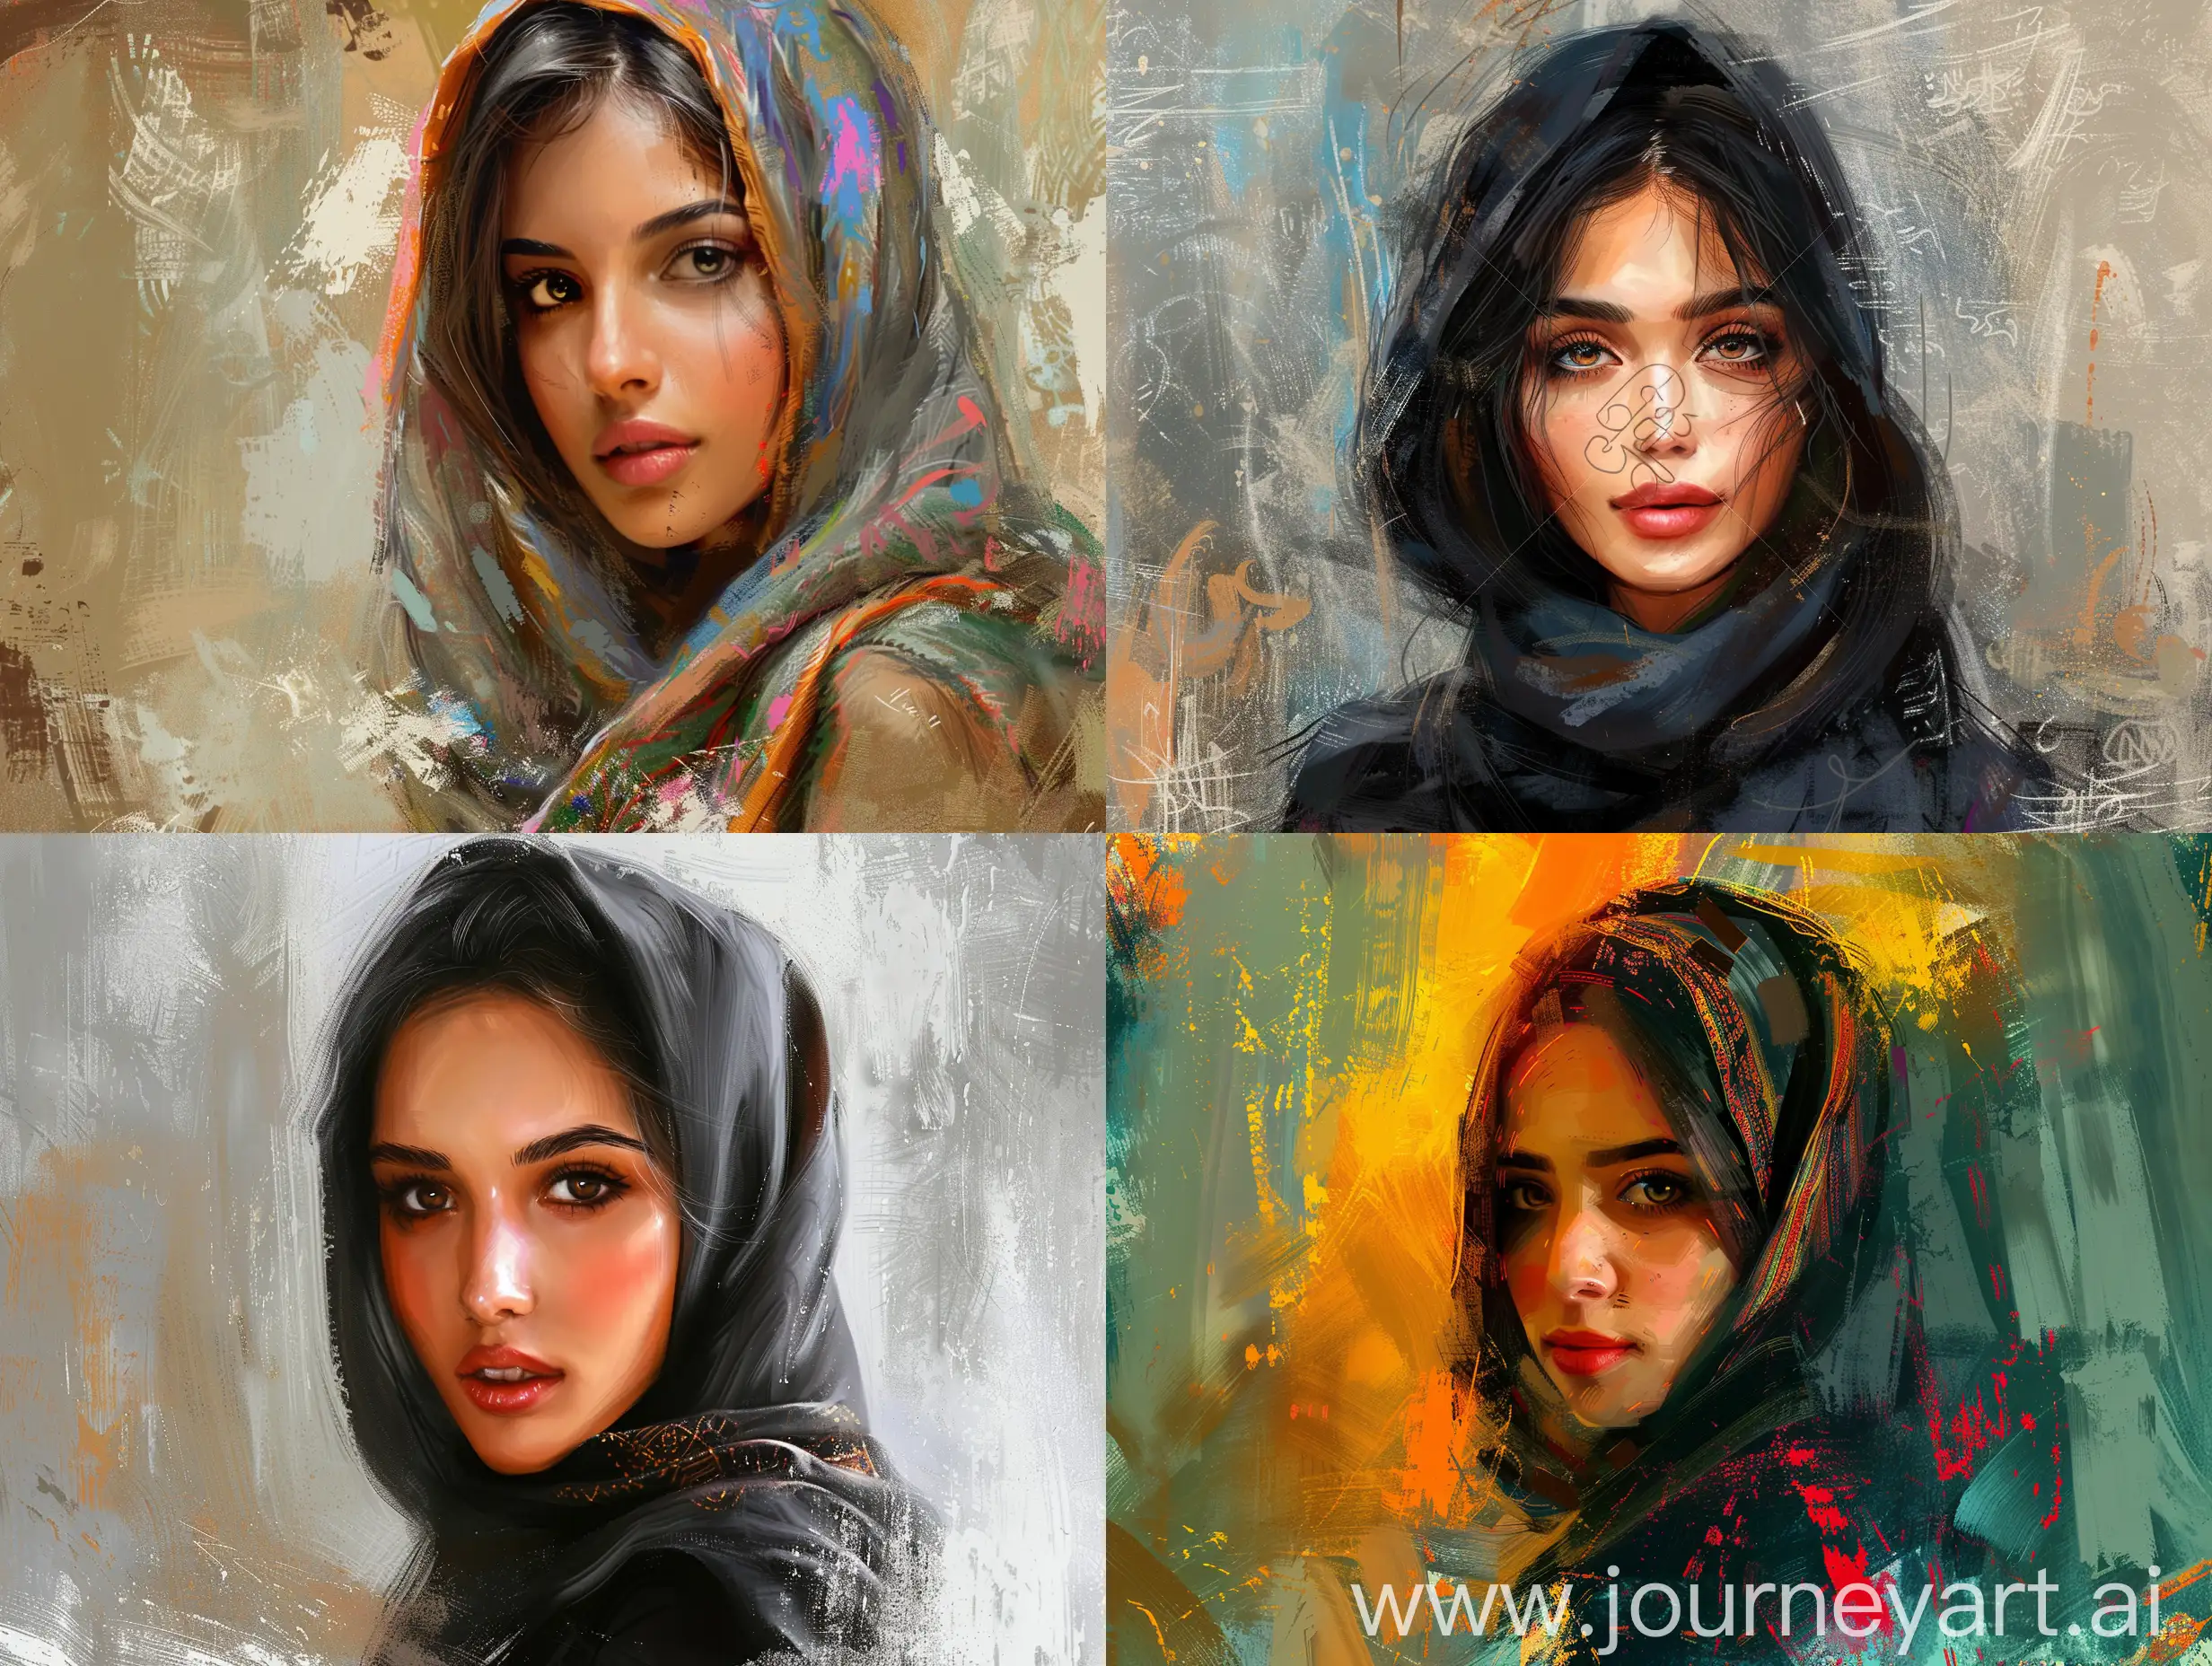 Digital-Painting-of-a-Hot-Charming-Iranian-Girl-Captivating-Portrait-by-Photoshop-Brushes